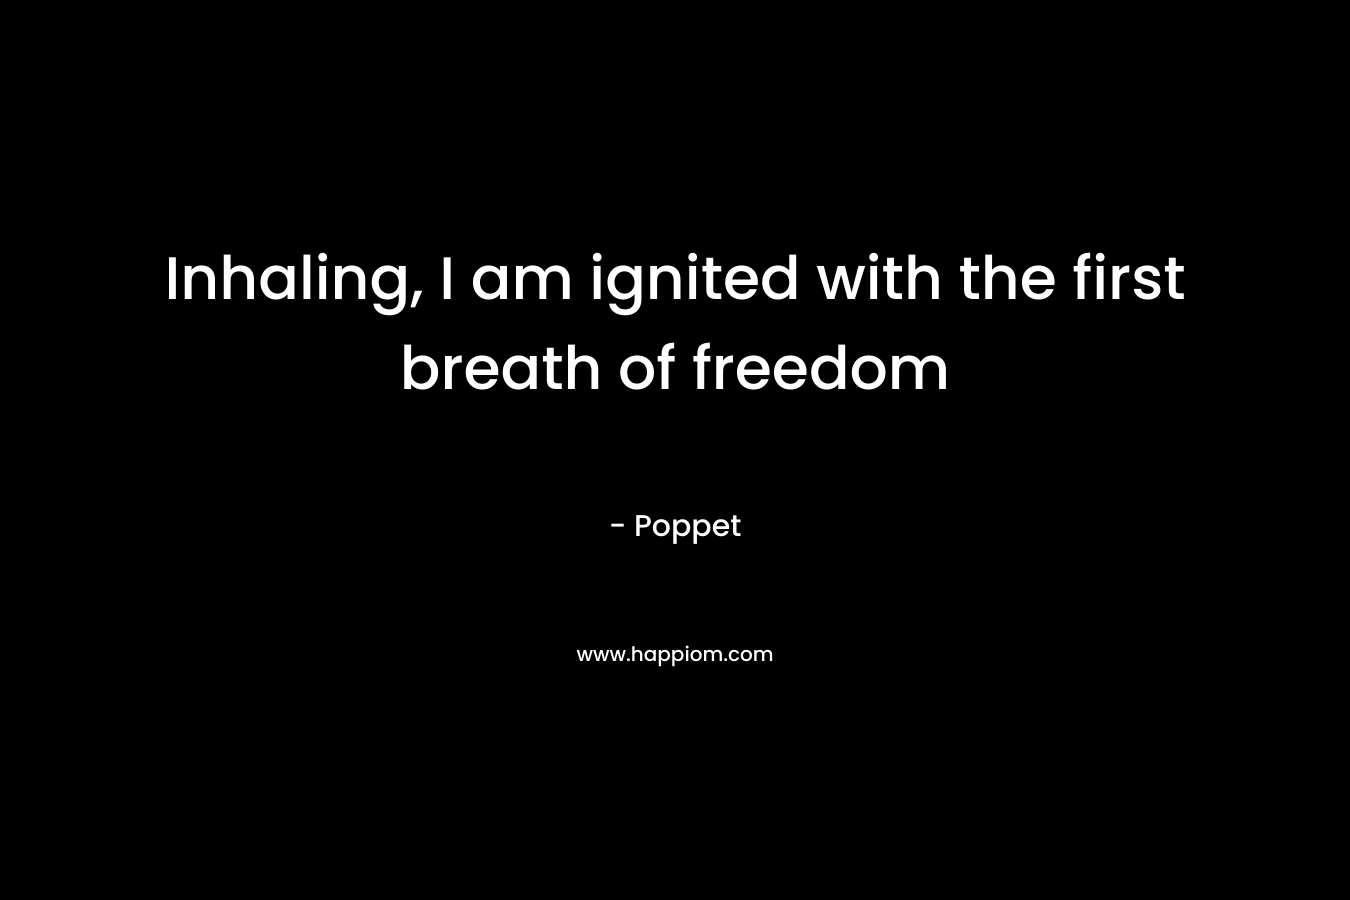 Inhaling, I am ignited with the first breath of freedom – Poppet